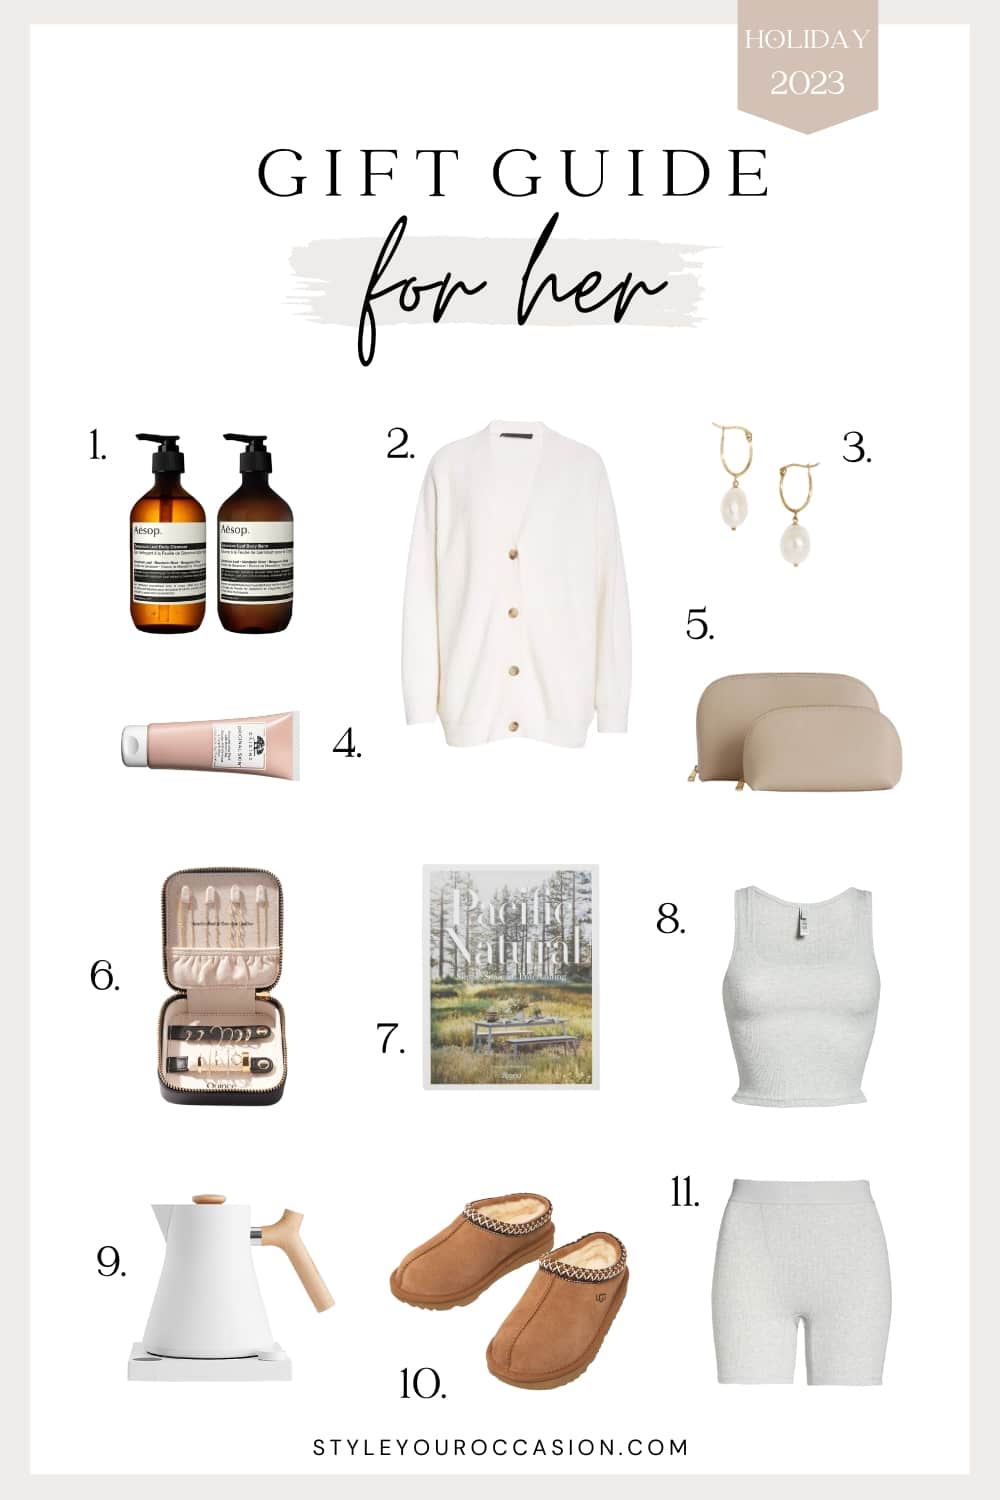 An image board of holiday gift ideas for her, including a cardigan, slippers, earrings, a jewelry case, and more